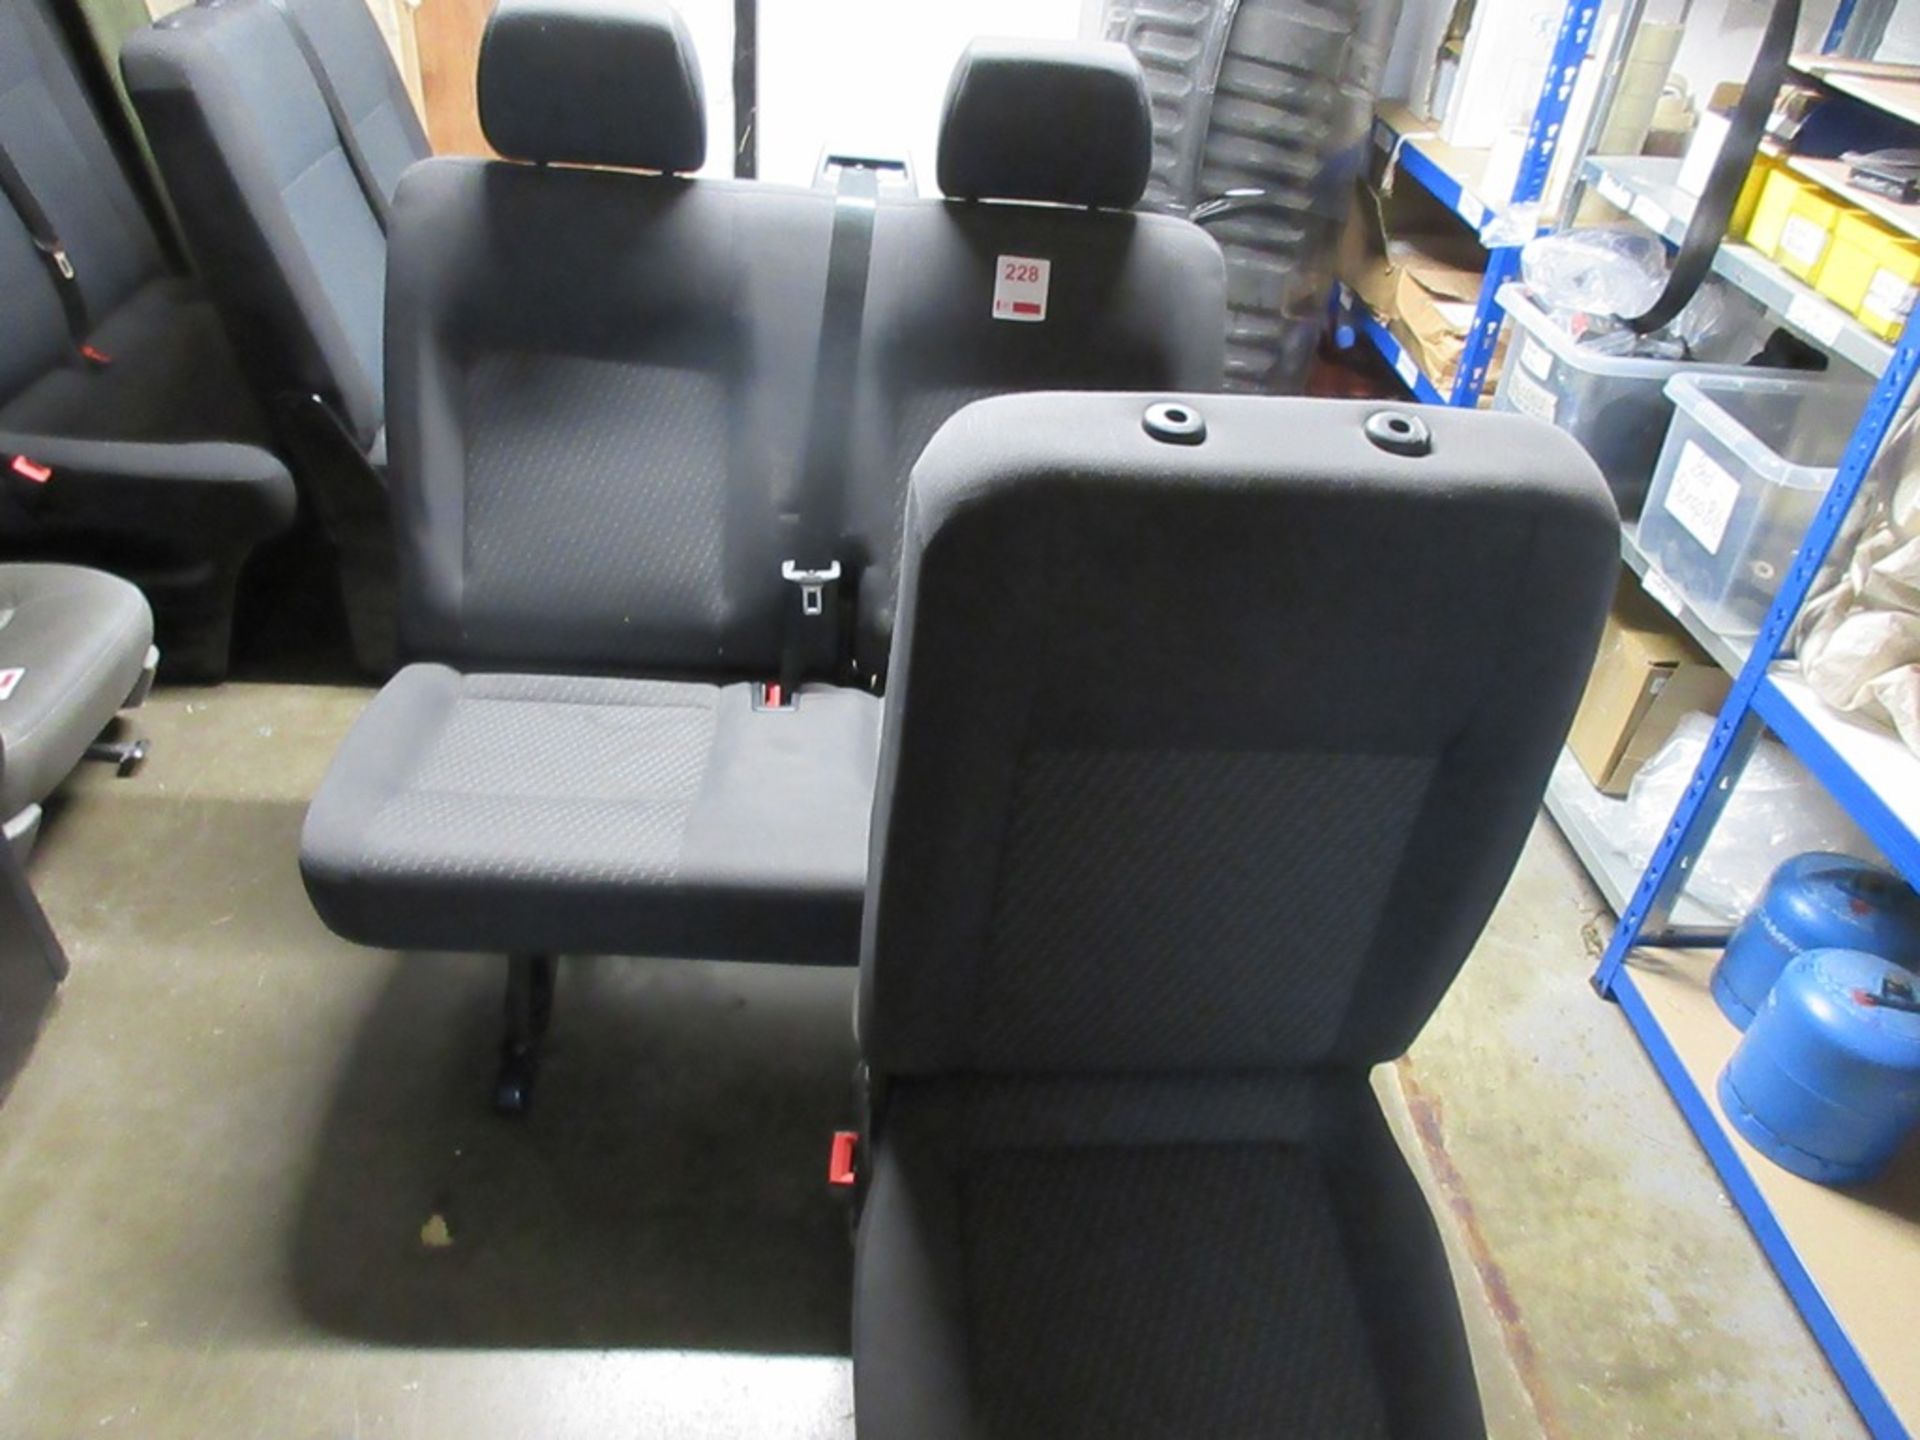 Upholstered clip in seats comprising of 1 x double, 1 x single